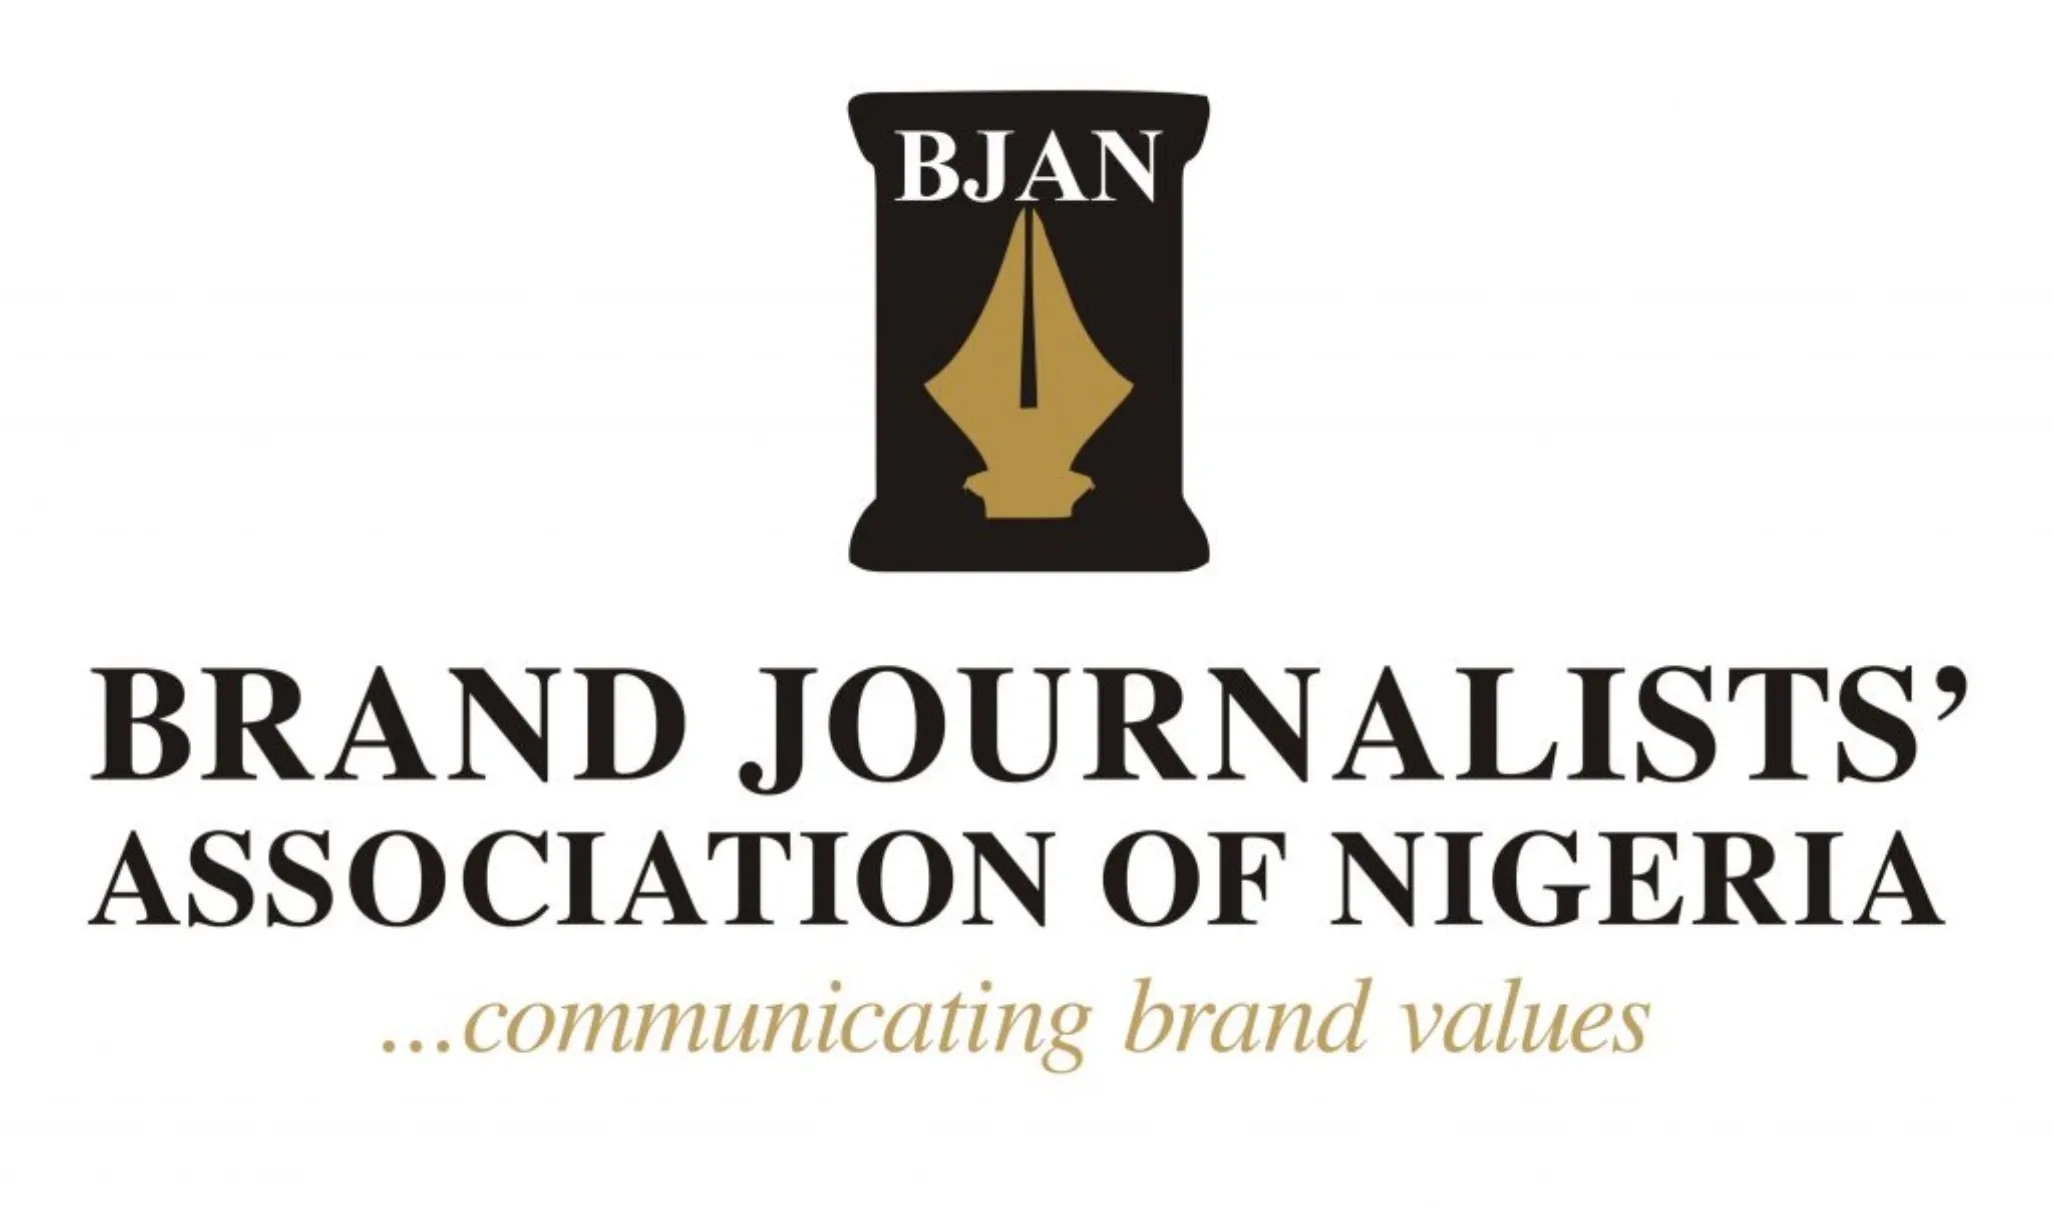 BJAN announces new date for 2023 Brands, Marketing Conference